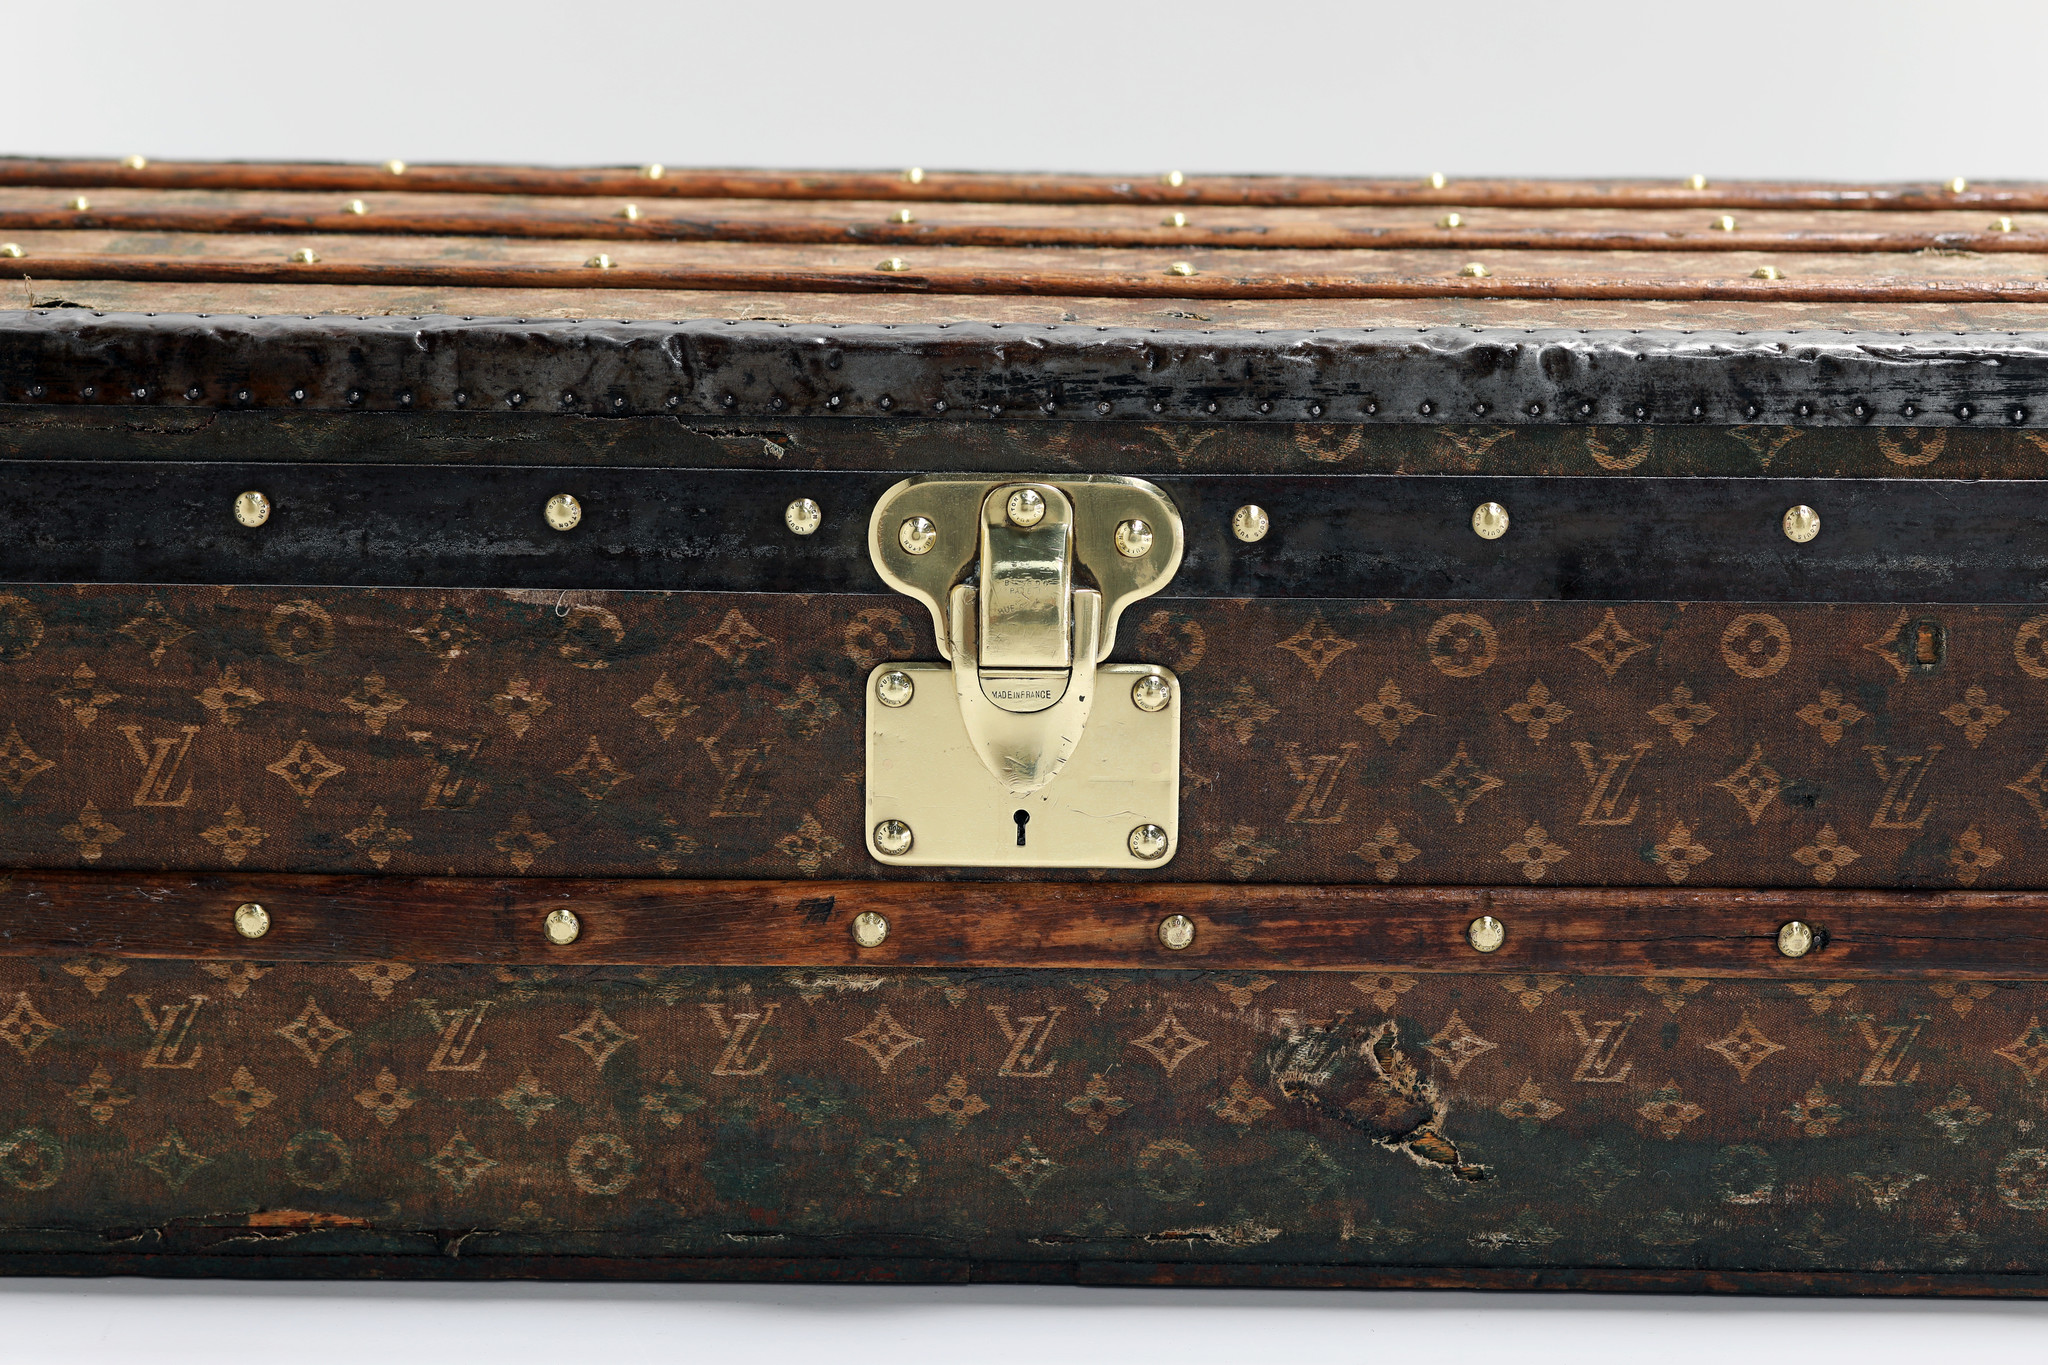 Rare Louis Vuitton suitcase, 1896 - THE HOUSE OF WAUW